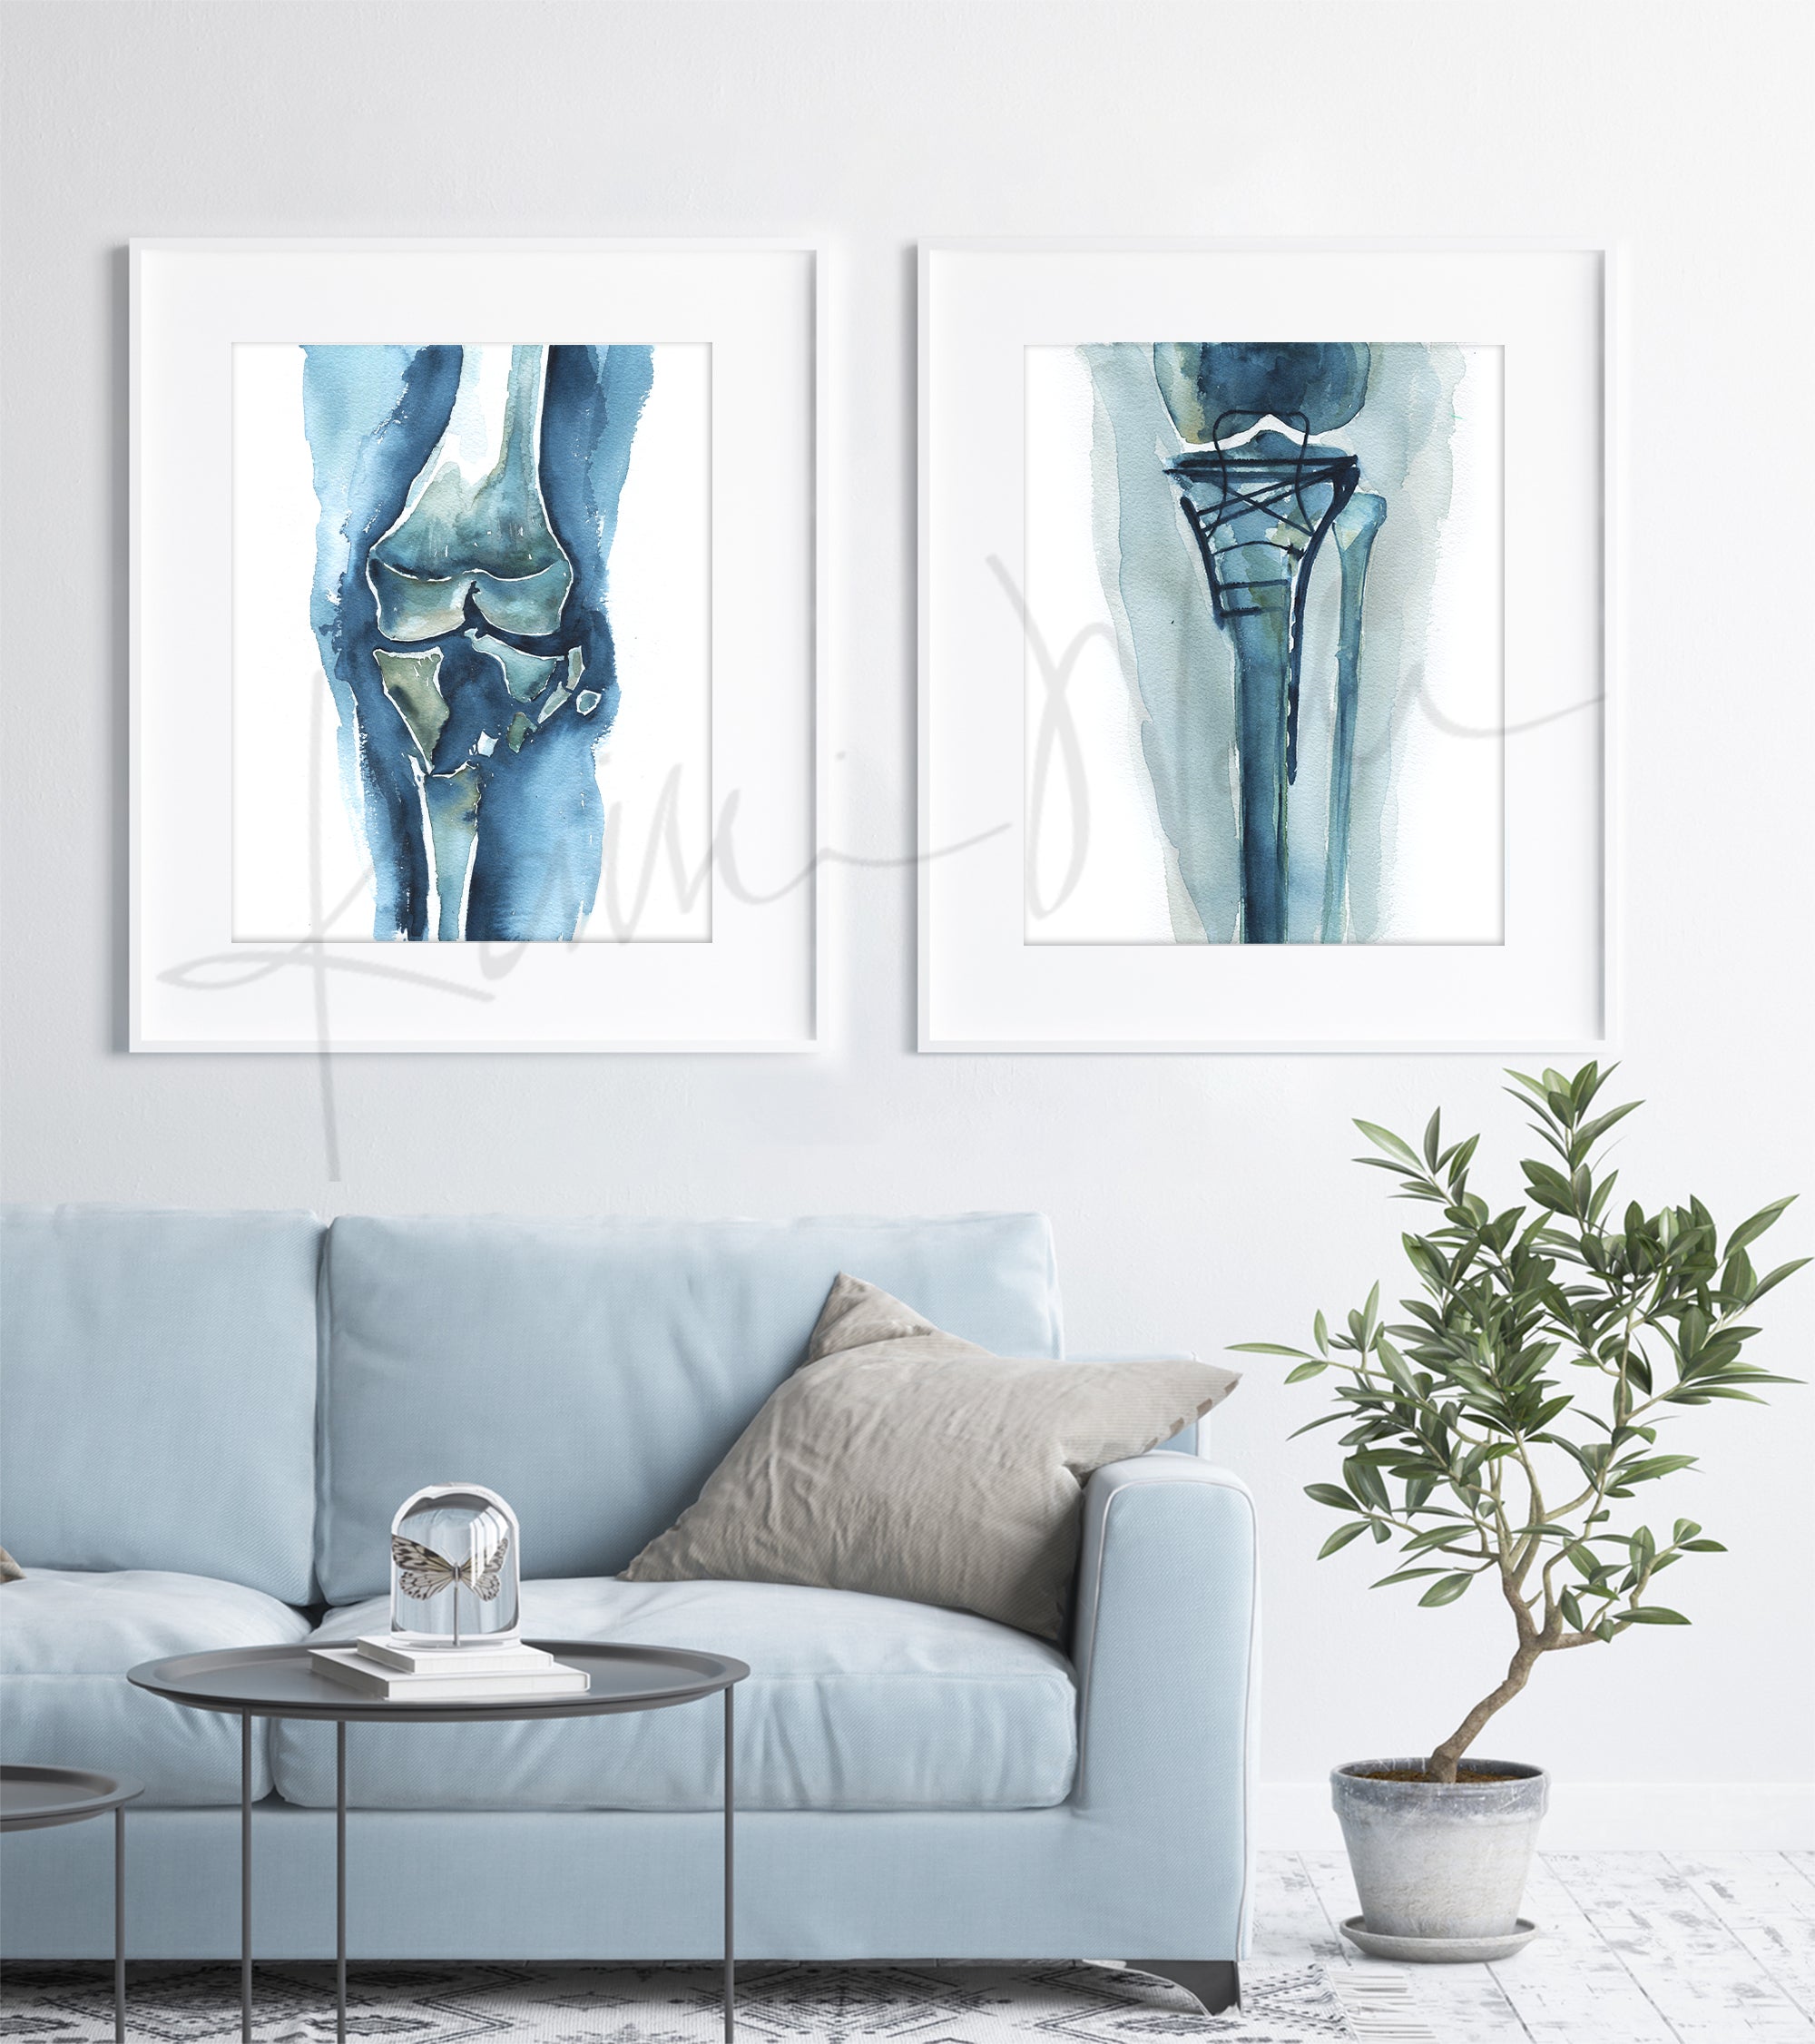 Framed watercolor painting of a before and after of a shattered knee and the hardware used to fix it. The paintings are hanging over a blue couch.